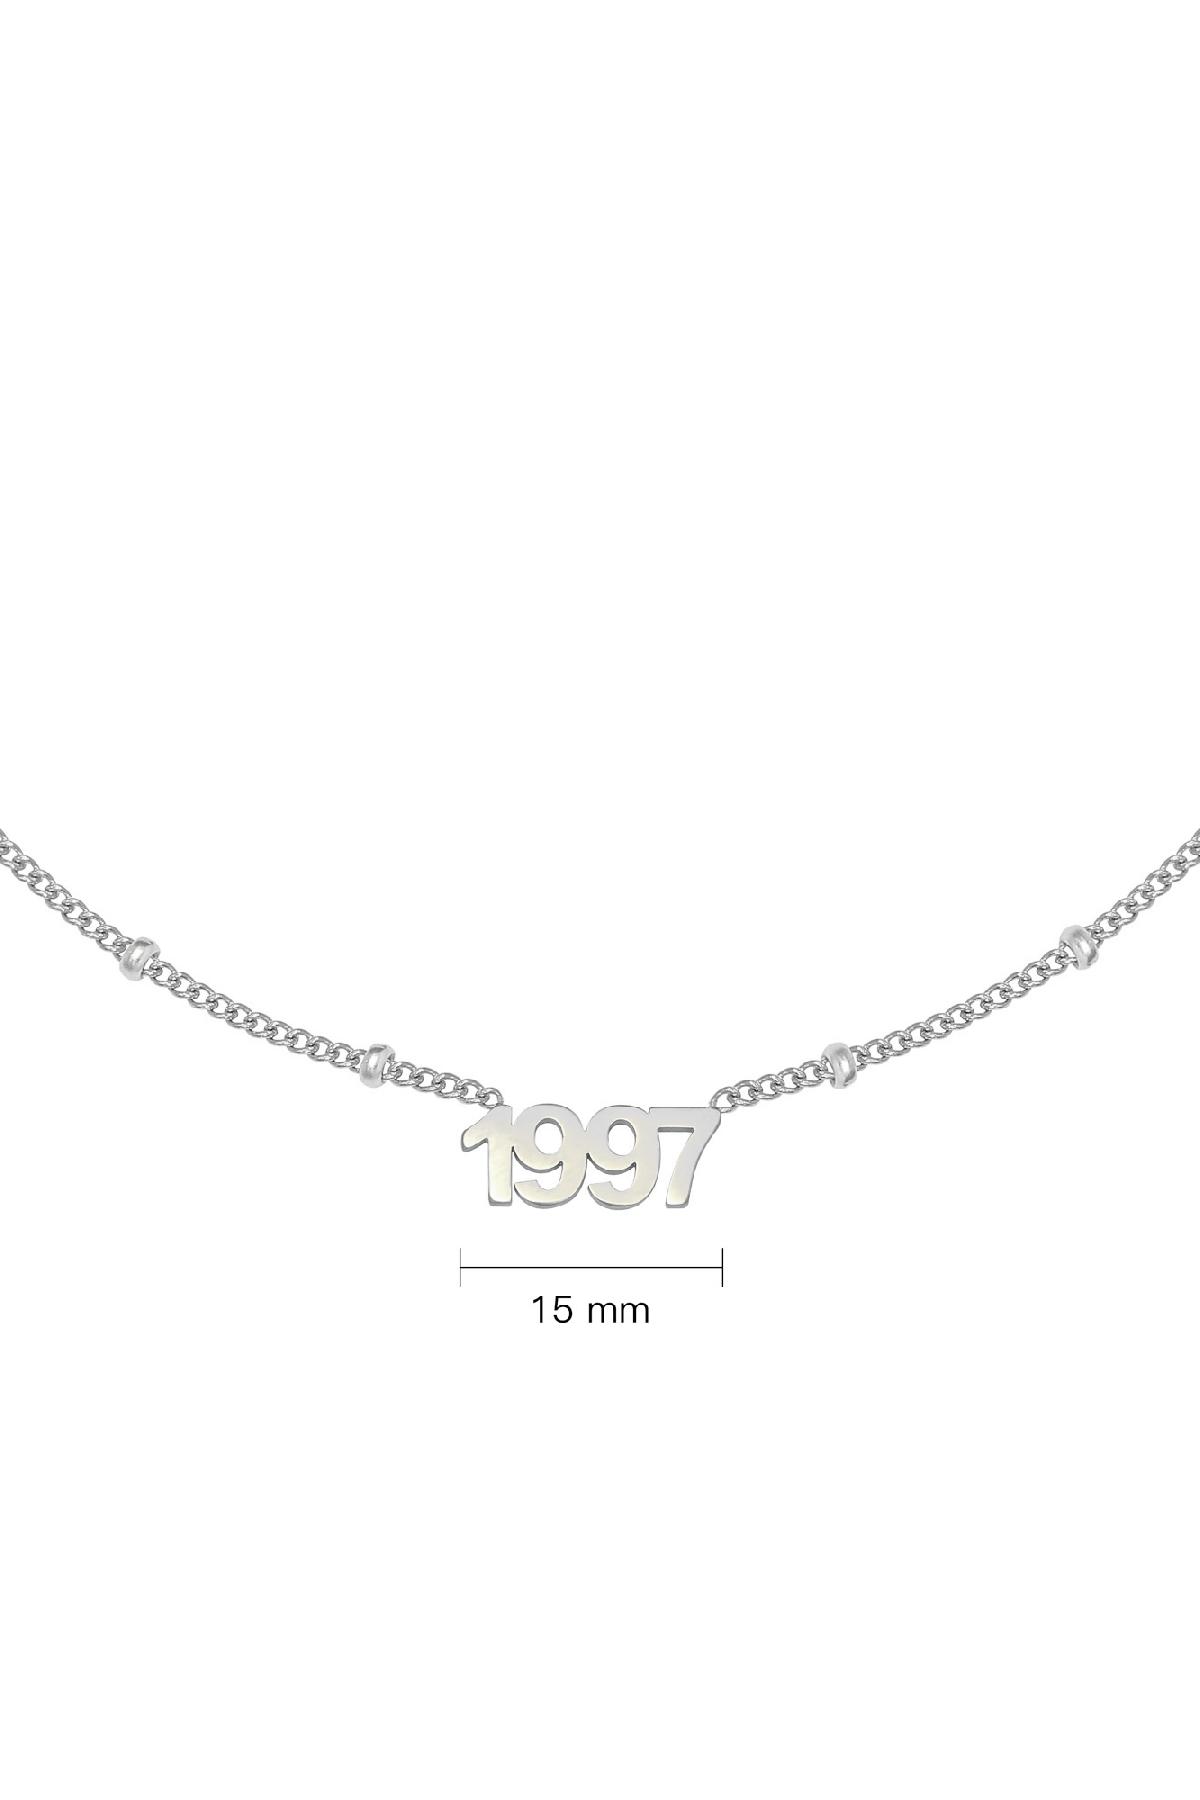 Necklace Year 1997 Silver Stainless Steel h5 Picture2